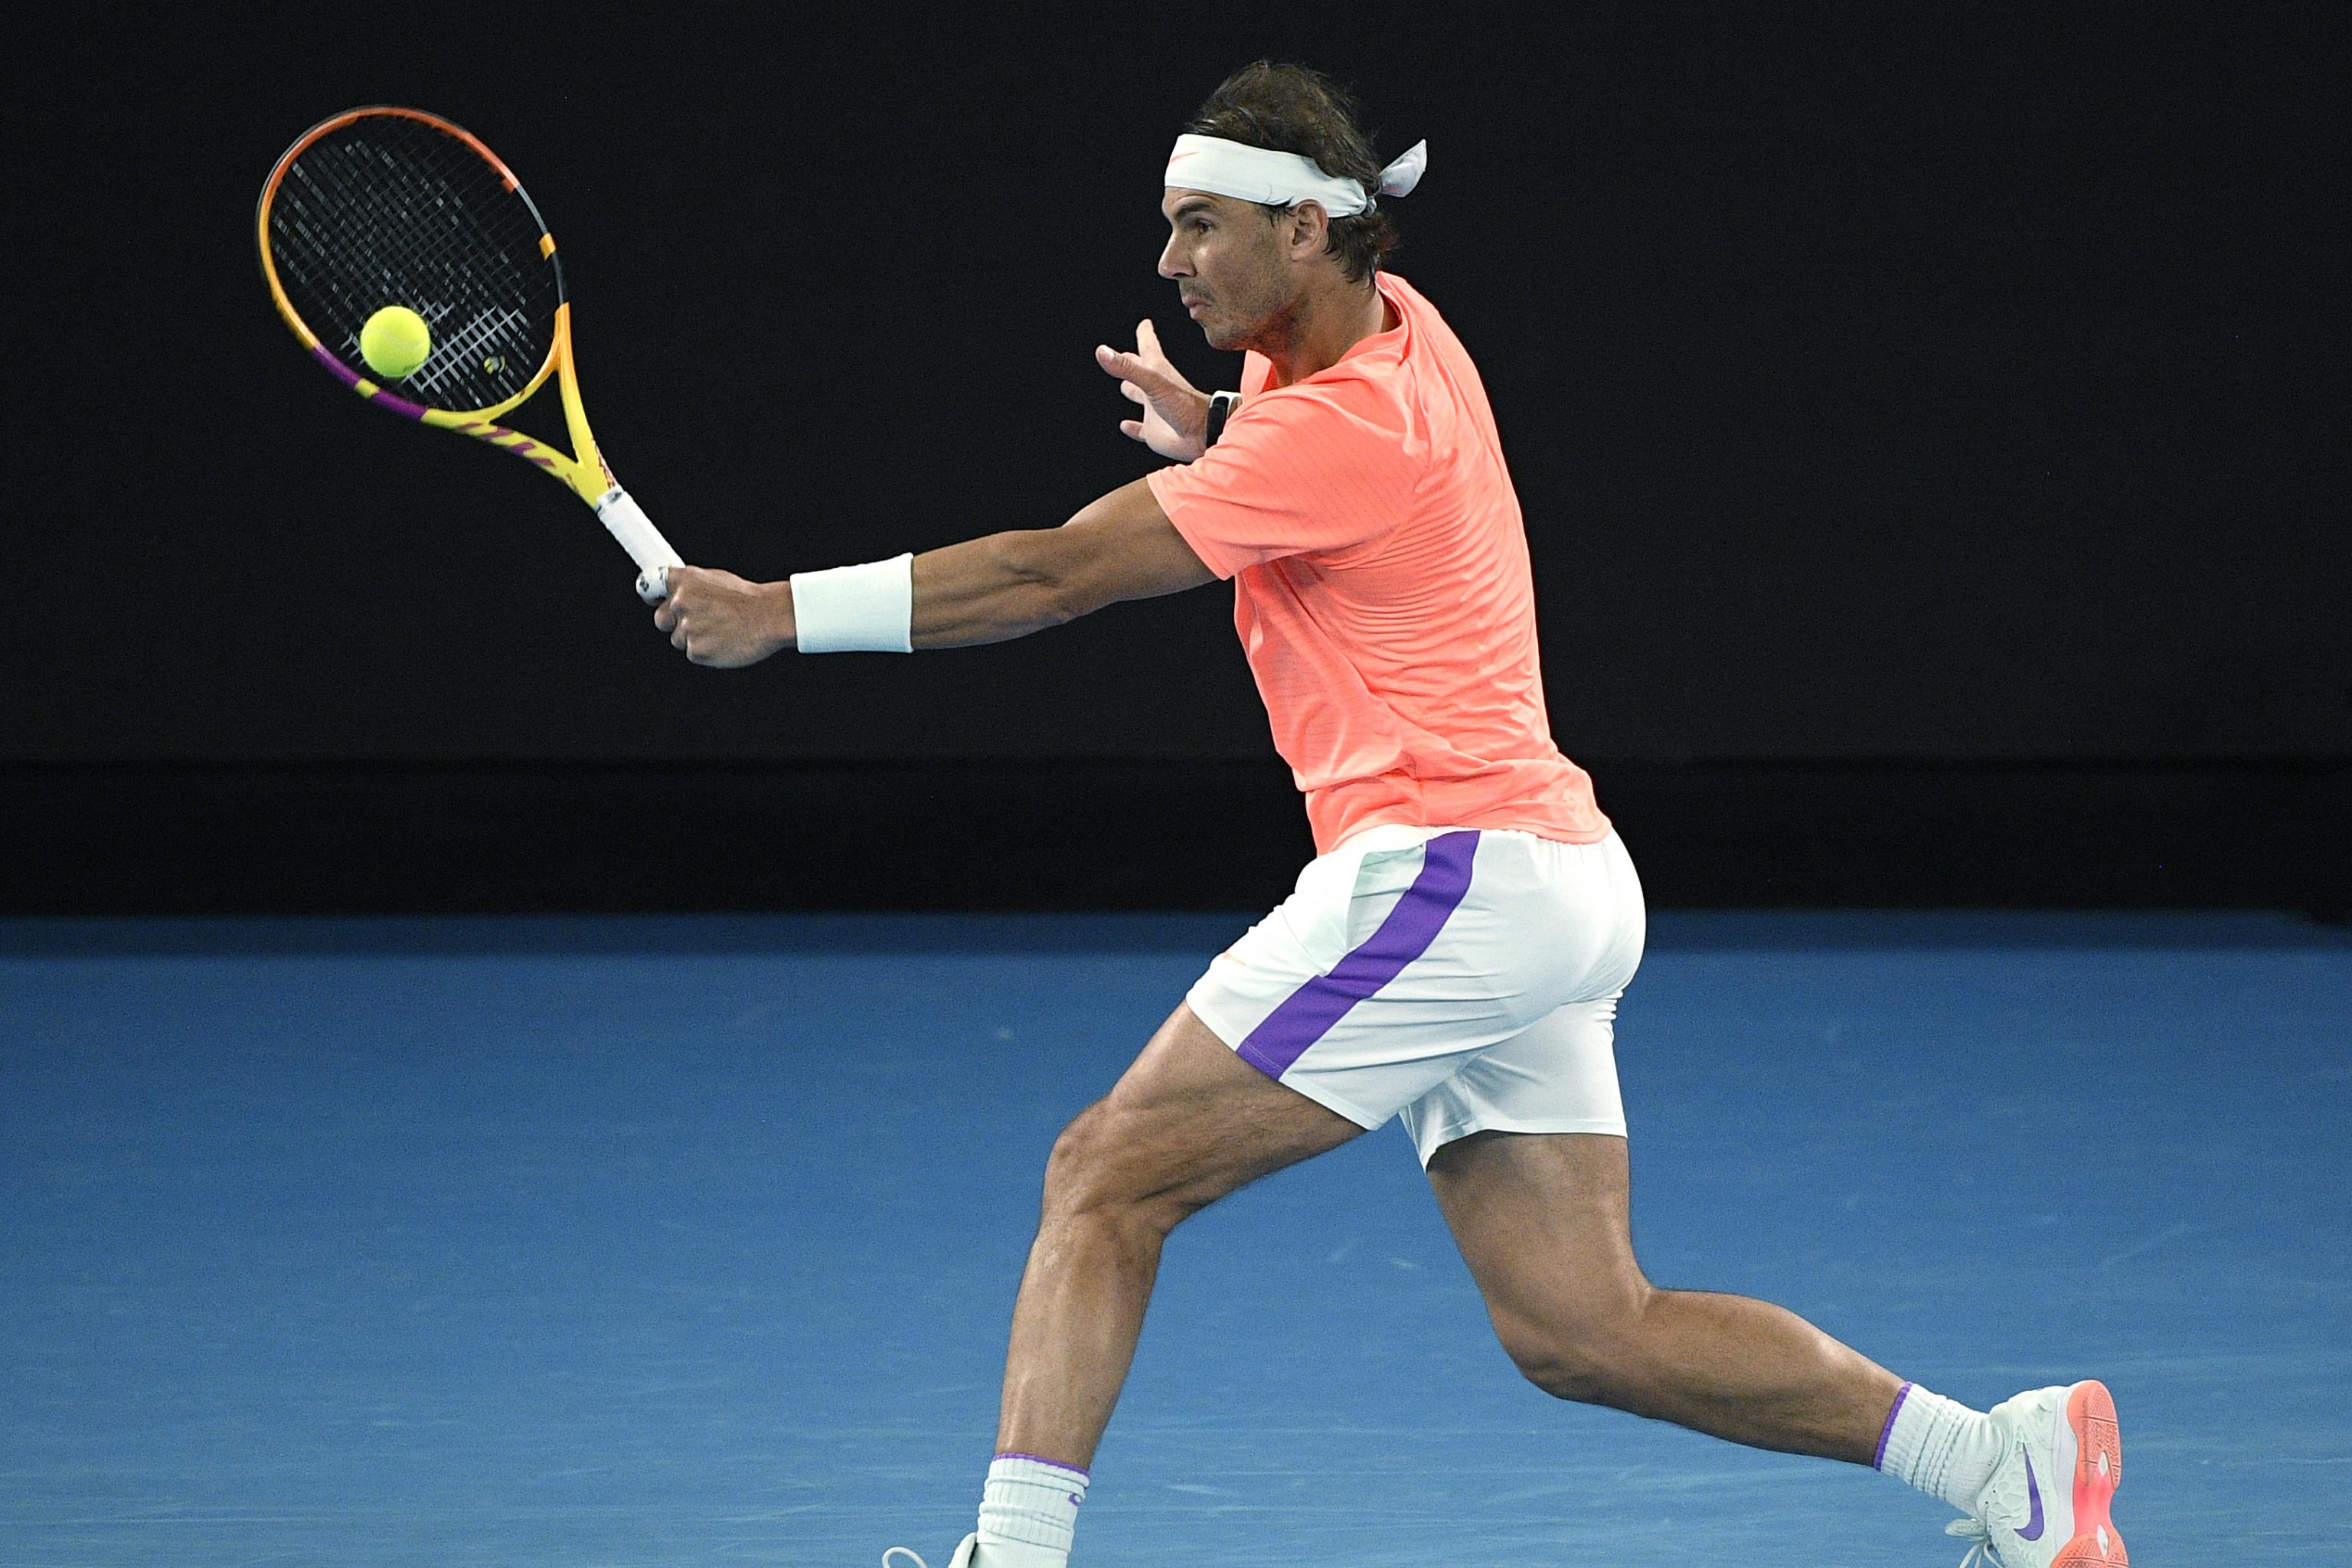 Australian Open 2021 Results: Winners, Scores, Stats from Saturday's Bracket | Bleacher Report | Latest News, Videos and